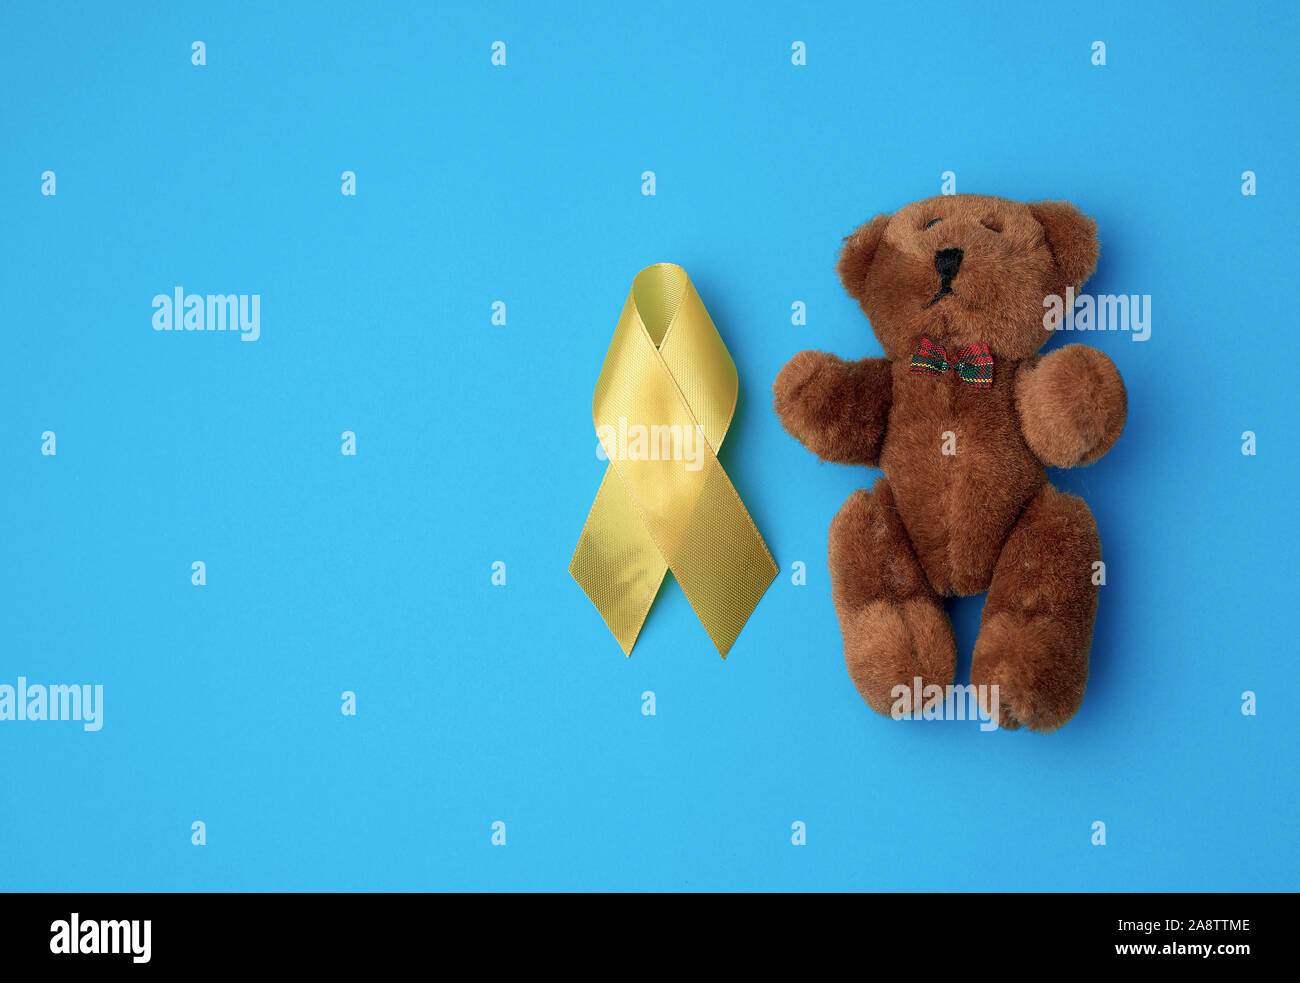 brown teddy bear and yellow silk ribbon on a blue background, concept of the fight against childhood cancer. problem of suicides and their prevention, Stock Photo